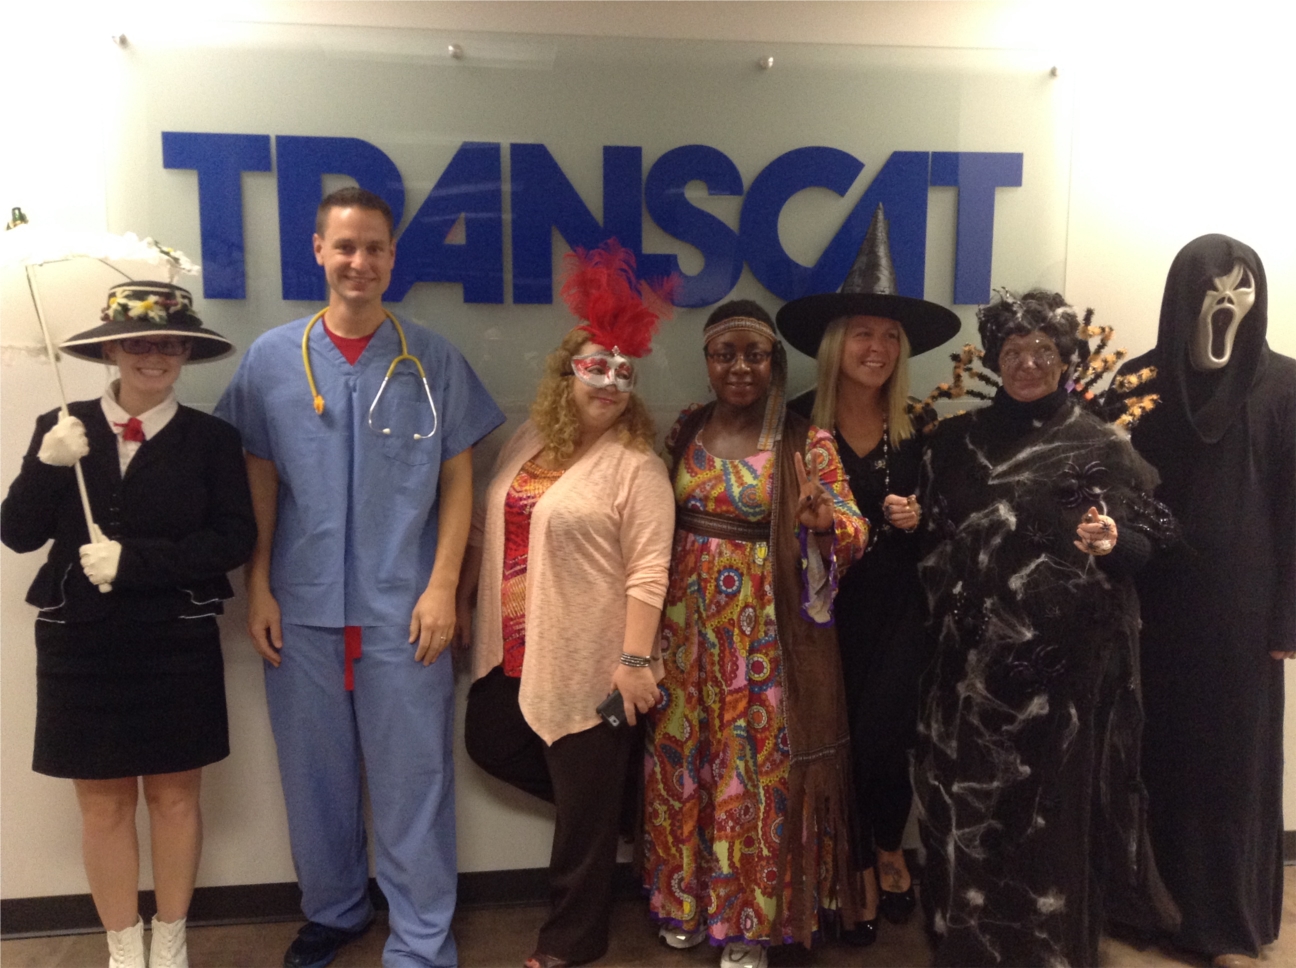 Transcat's 2013 Halloween celebration with a number of our participating employees